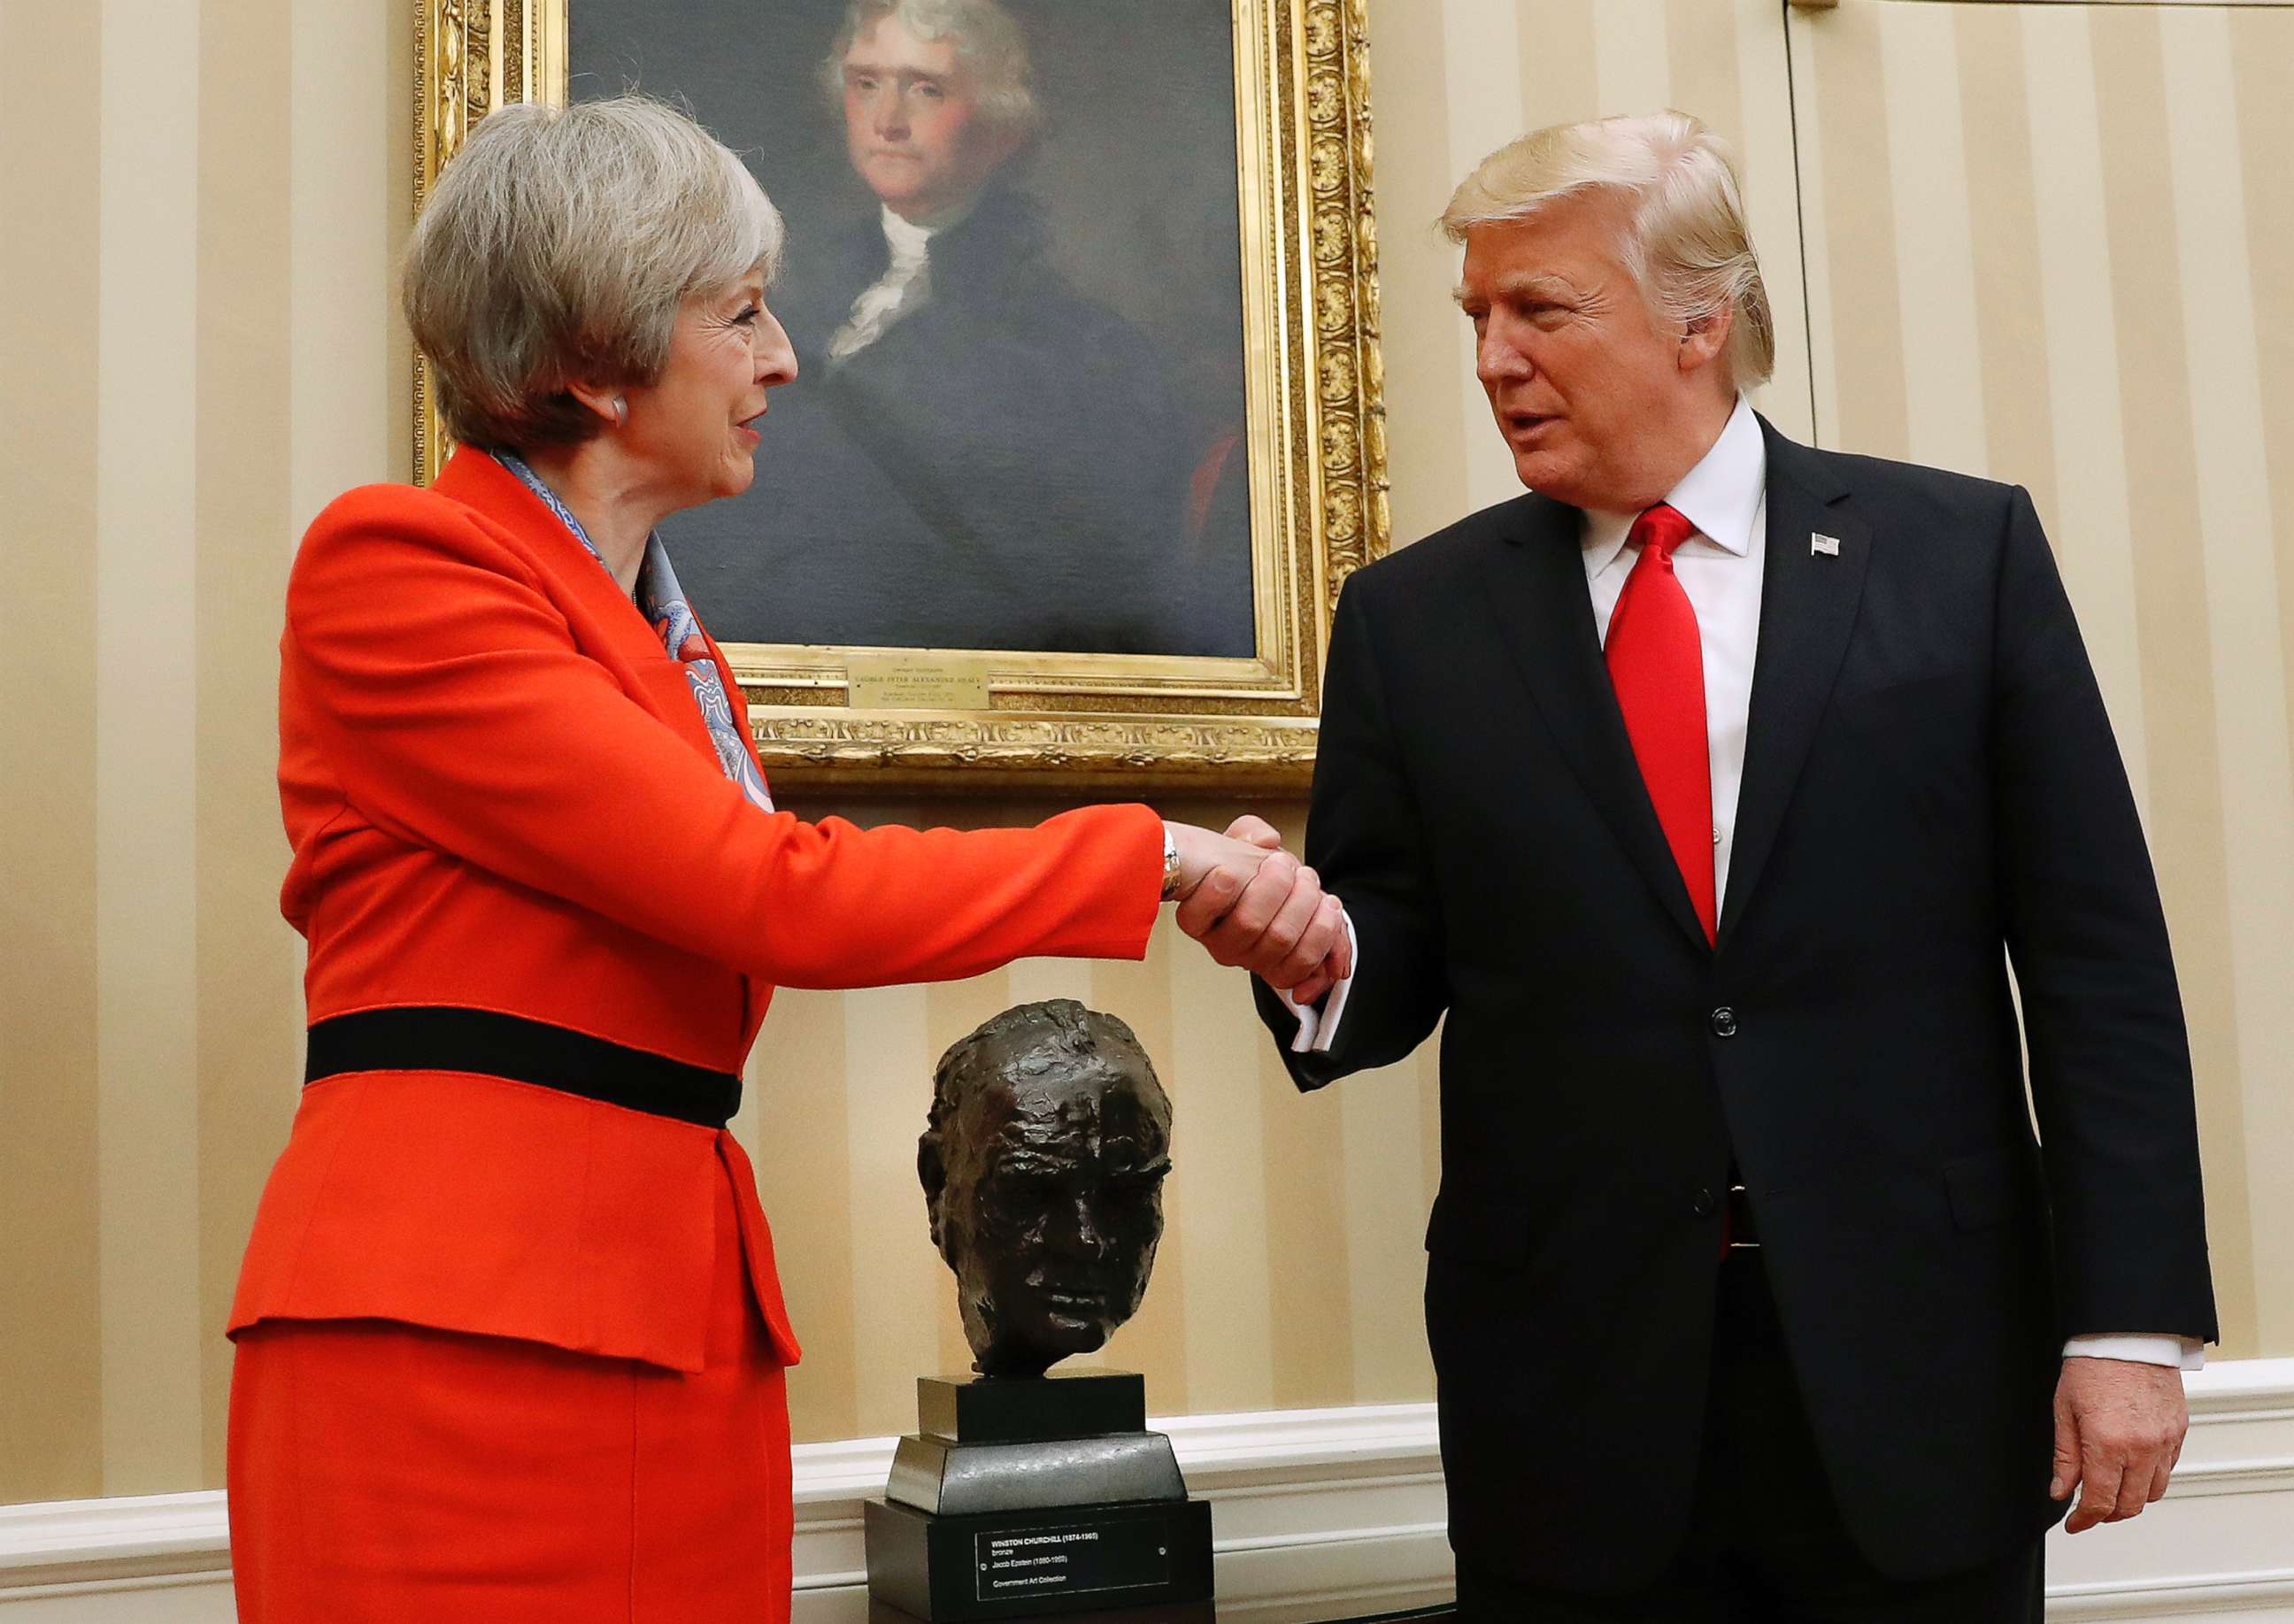 PHOTO: British Prime Minister Theresa May shakes hands with President Donald Trump in the Oval Office of the White House, Jan. 27, 2017.  